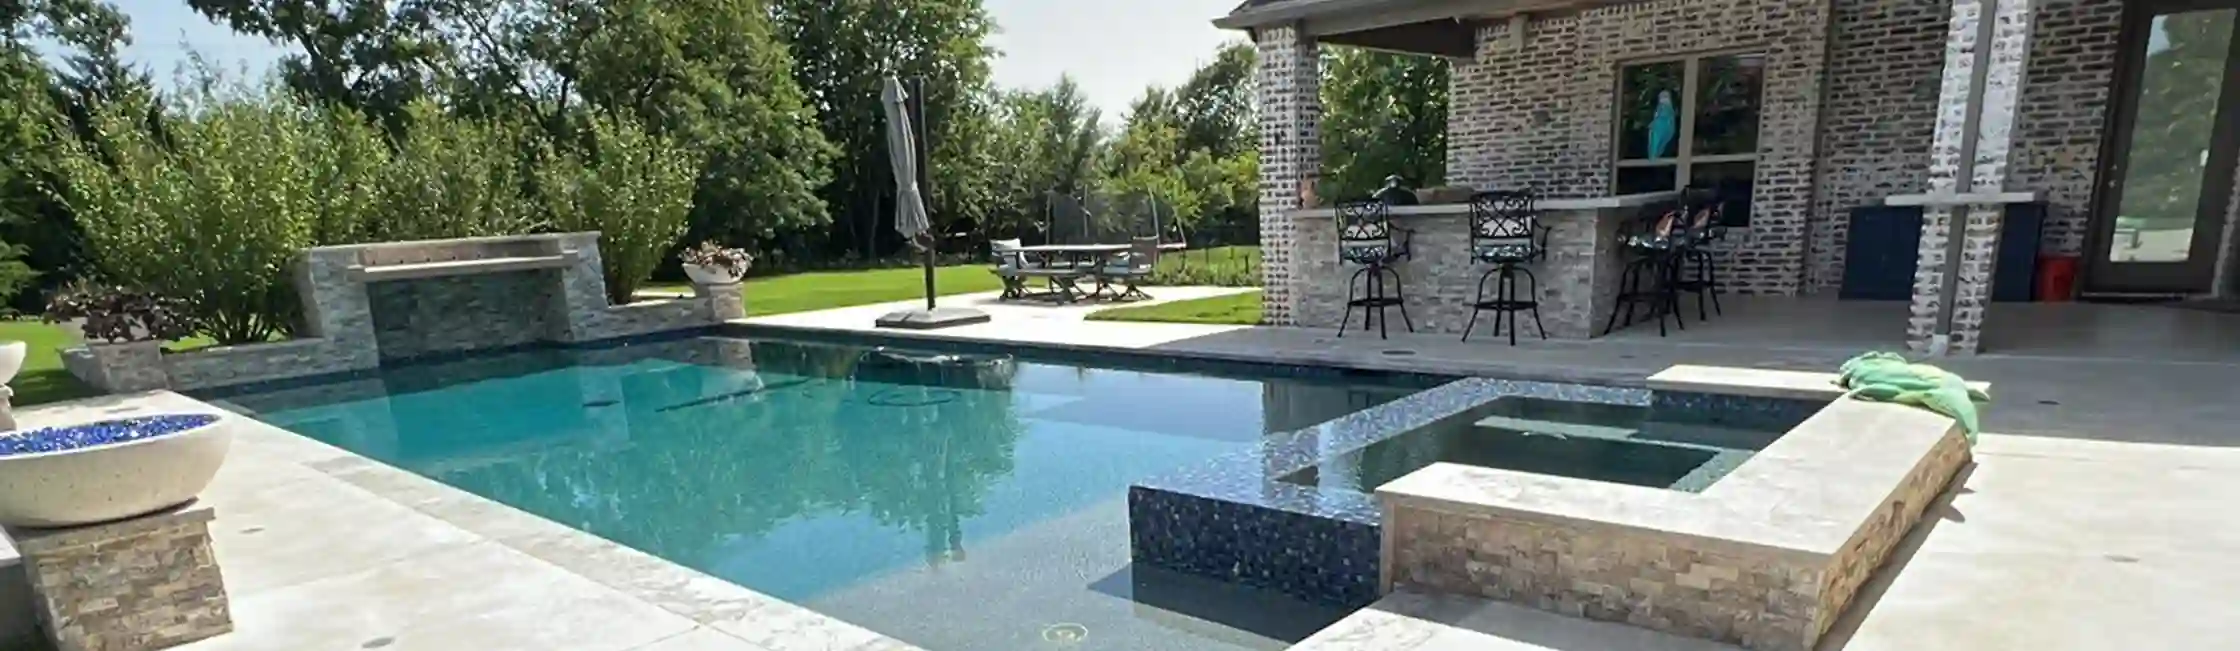 Custom pool builds with BLC Construction in Prosper Texas, 75078